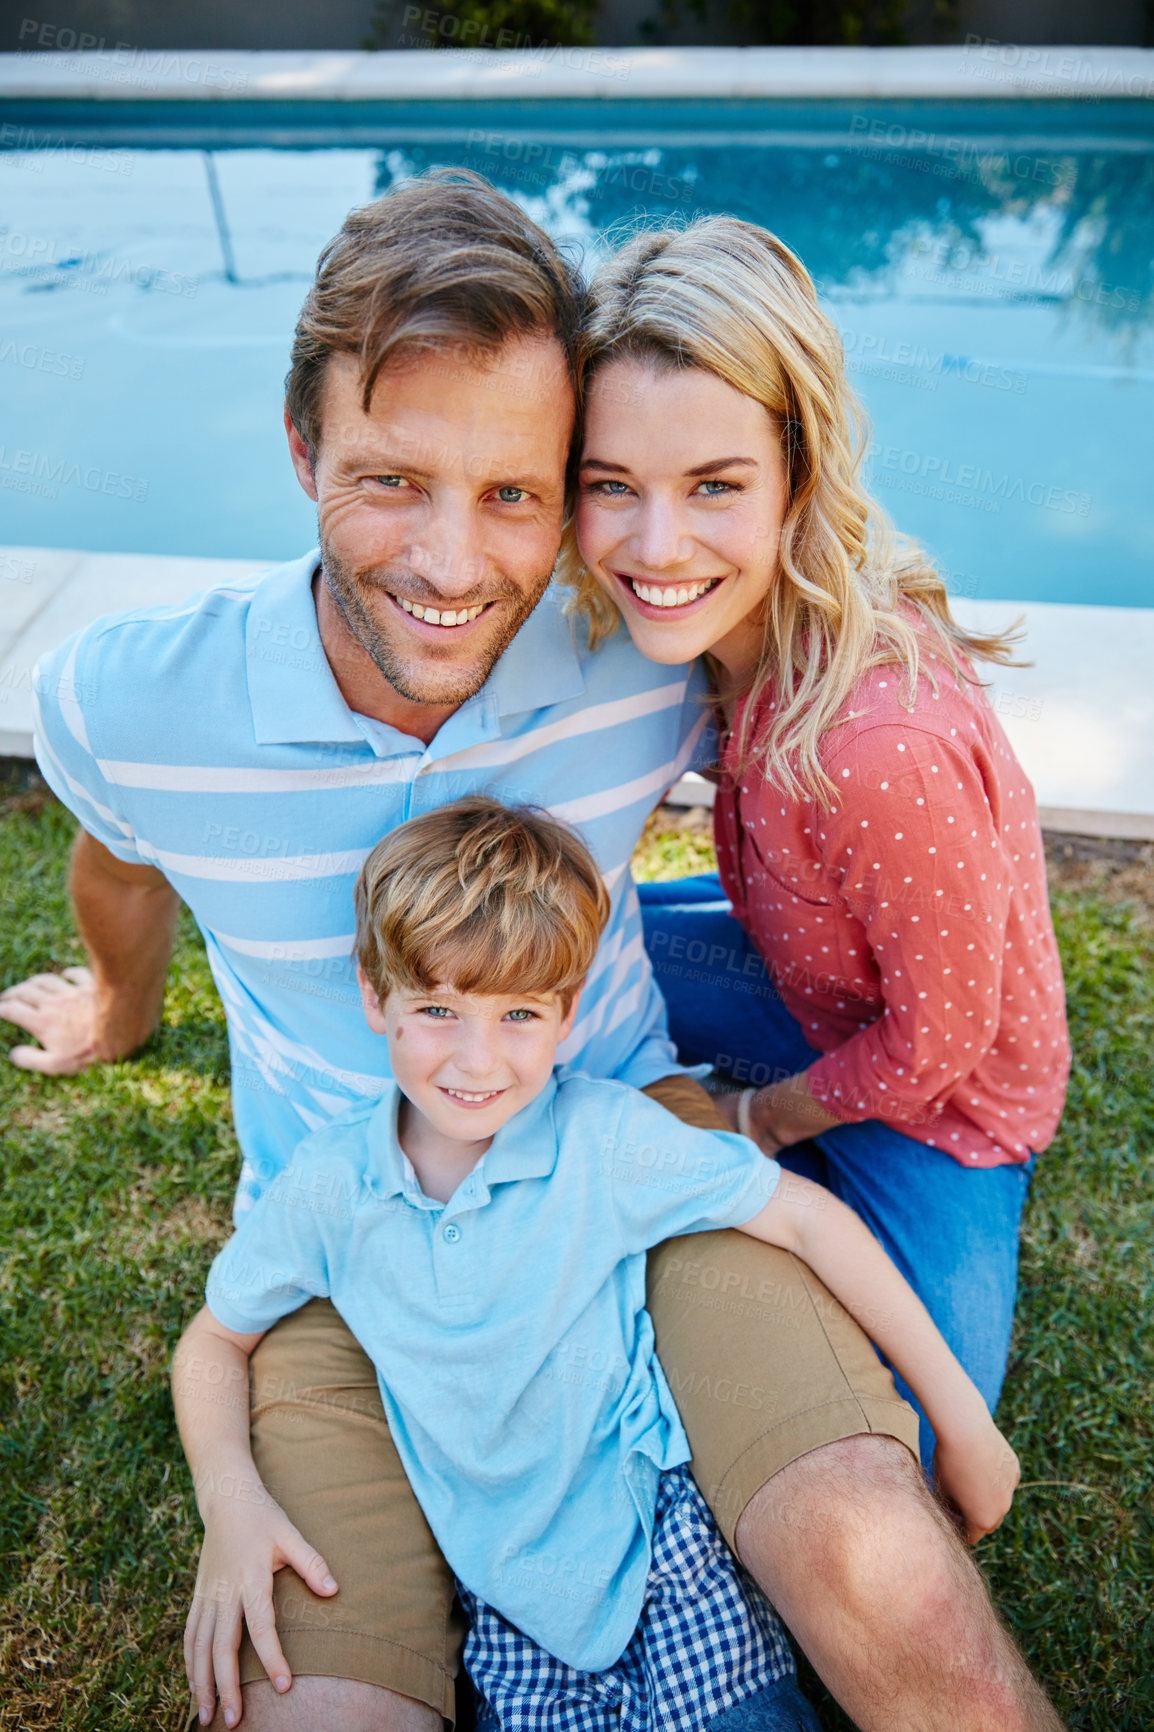 Buy stock photo Portrait of a happy family enjoying a day outdoors together